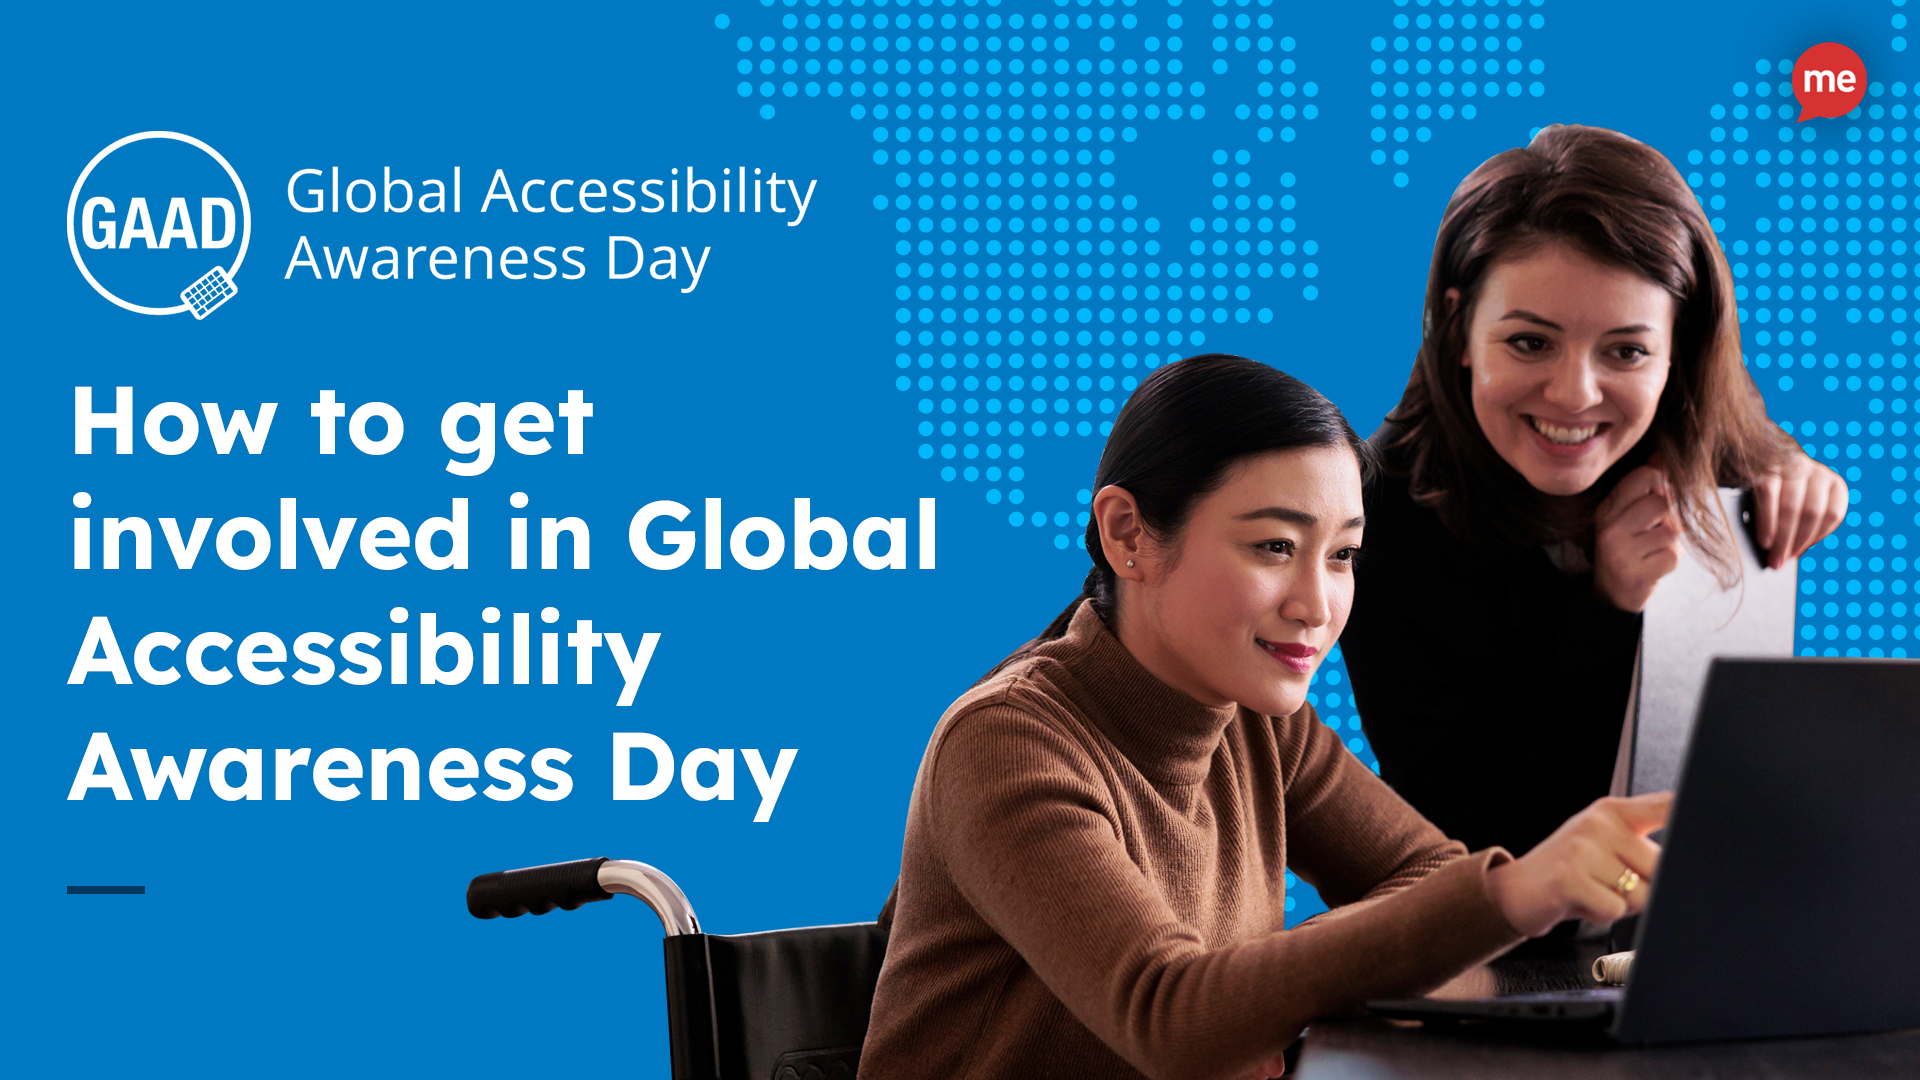 How to get involved in Global Accessibility Awareness Day